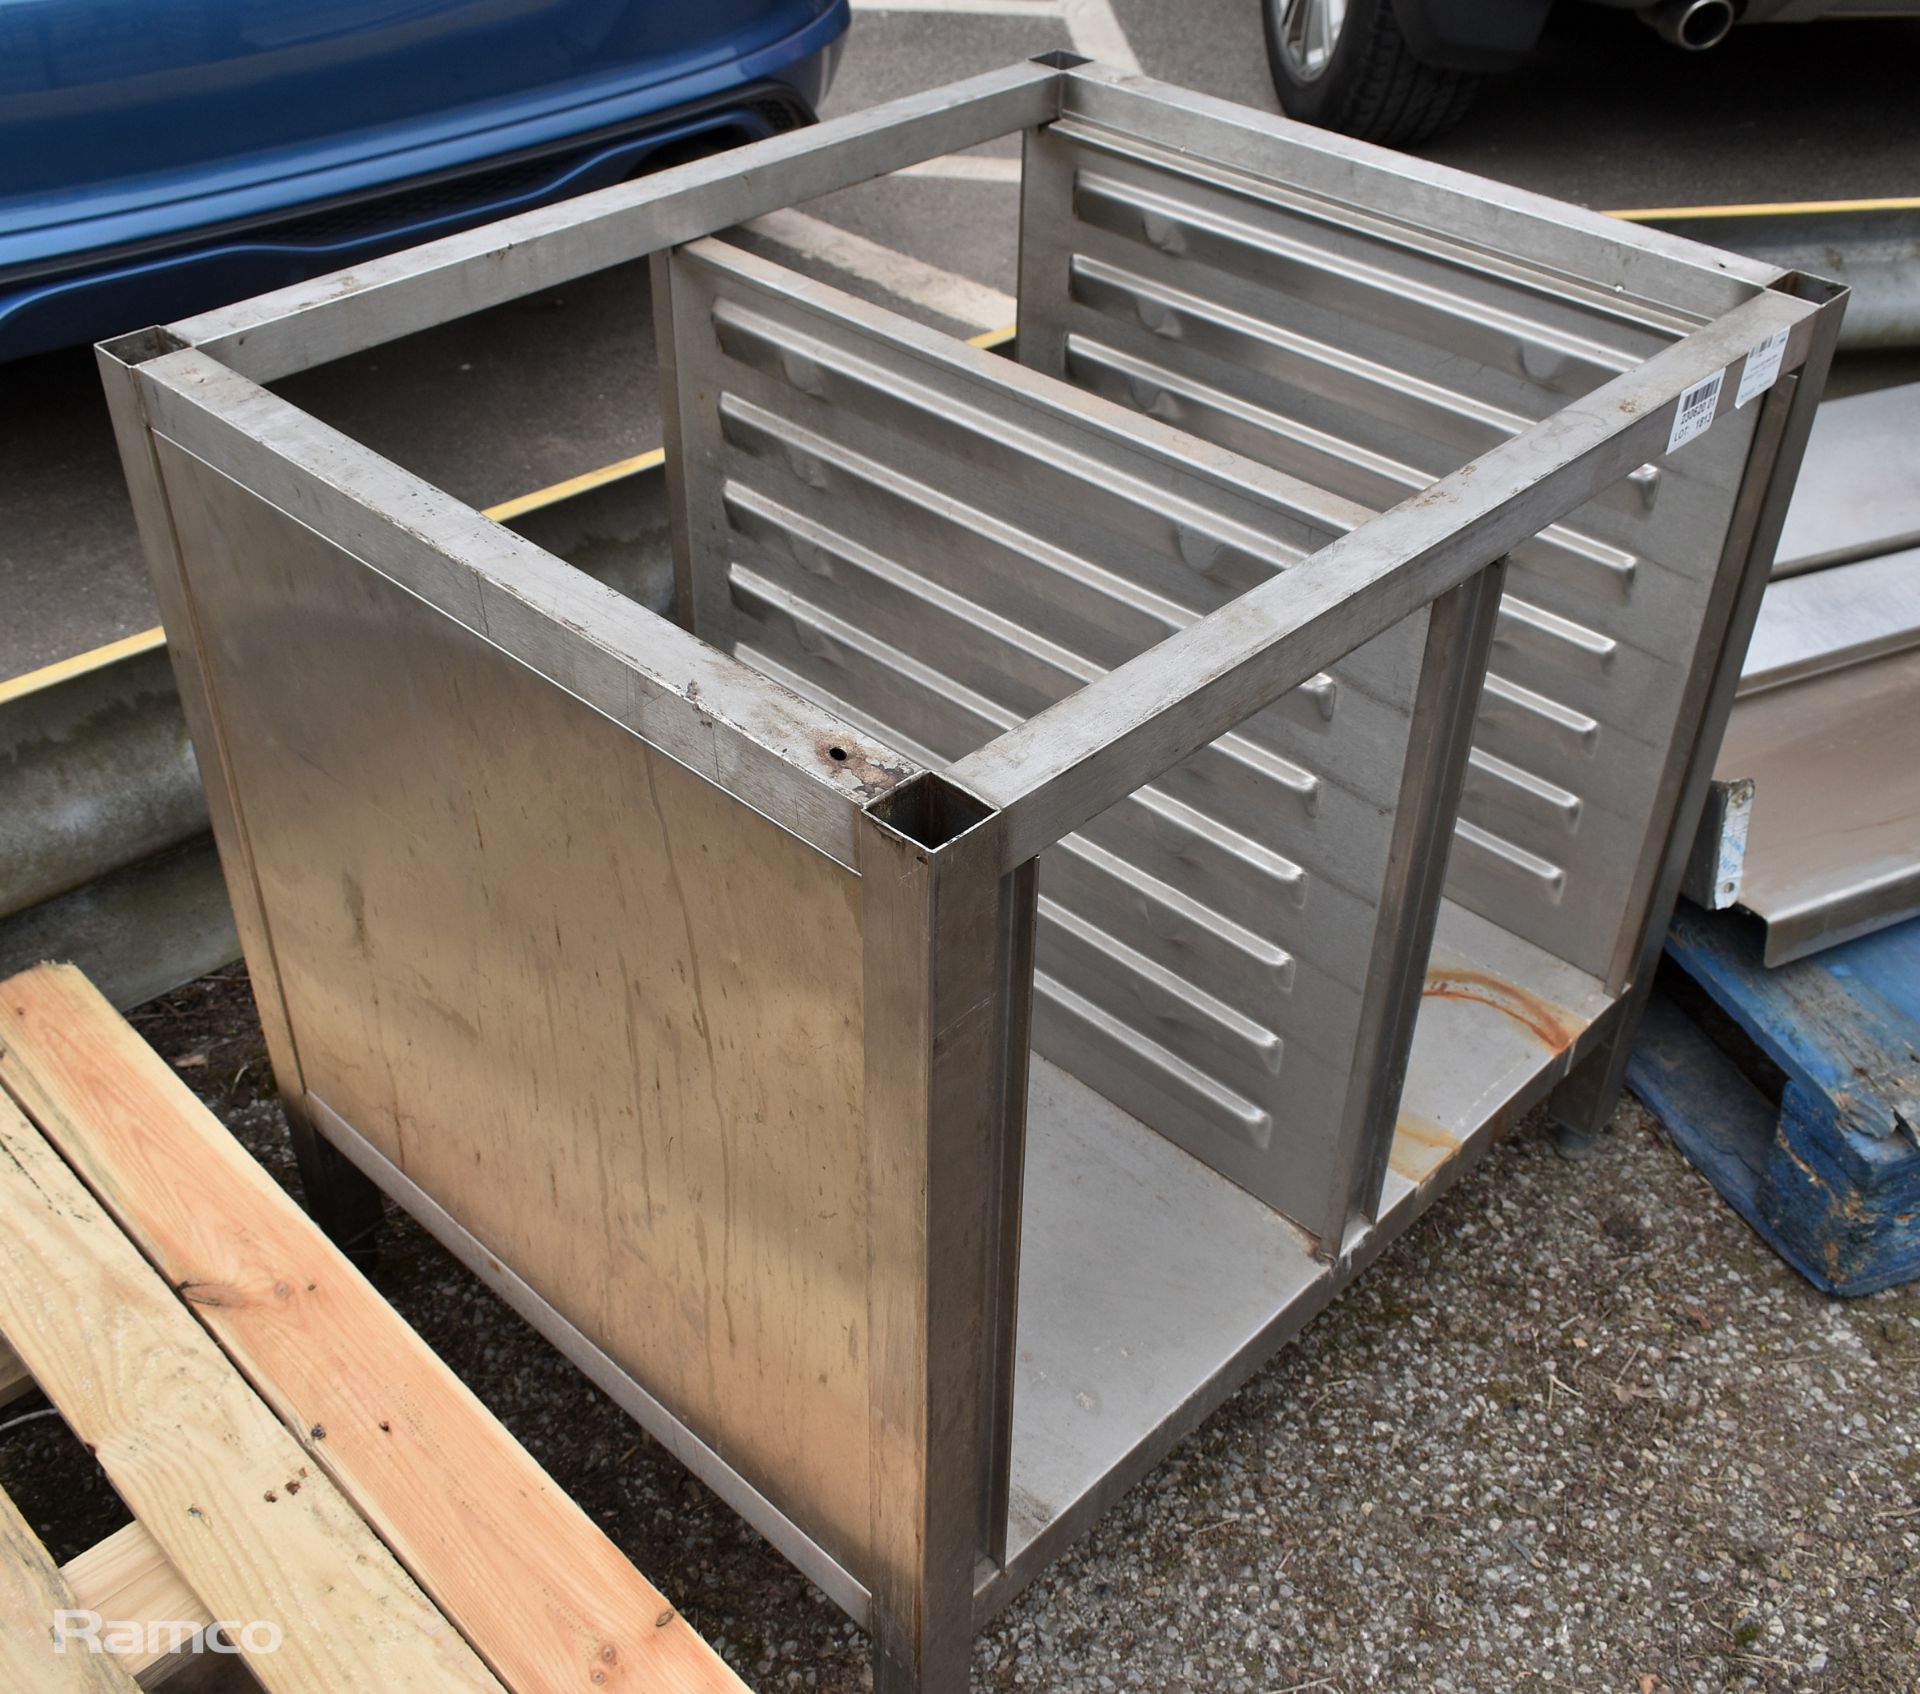 14 shelf stainless steel racking unit - L 800 x W 640 x H 770mm - Image 2 of 3